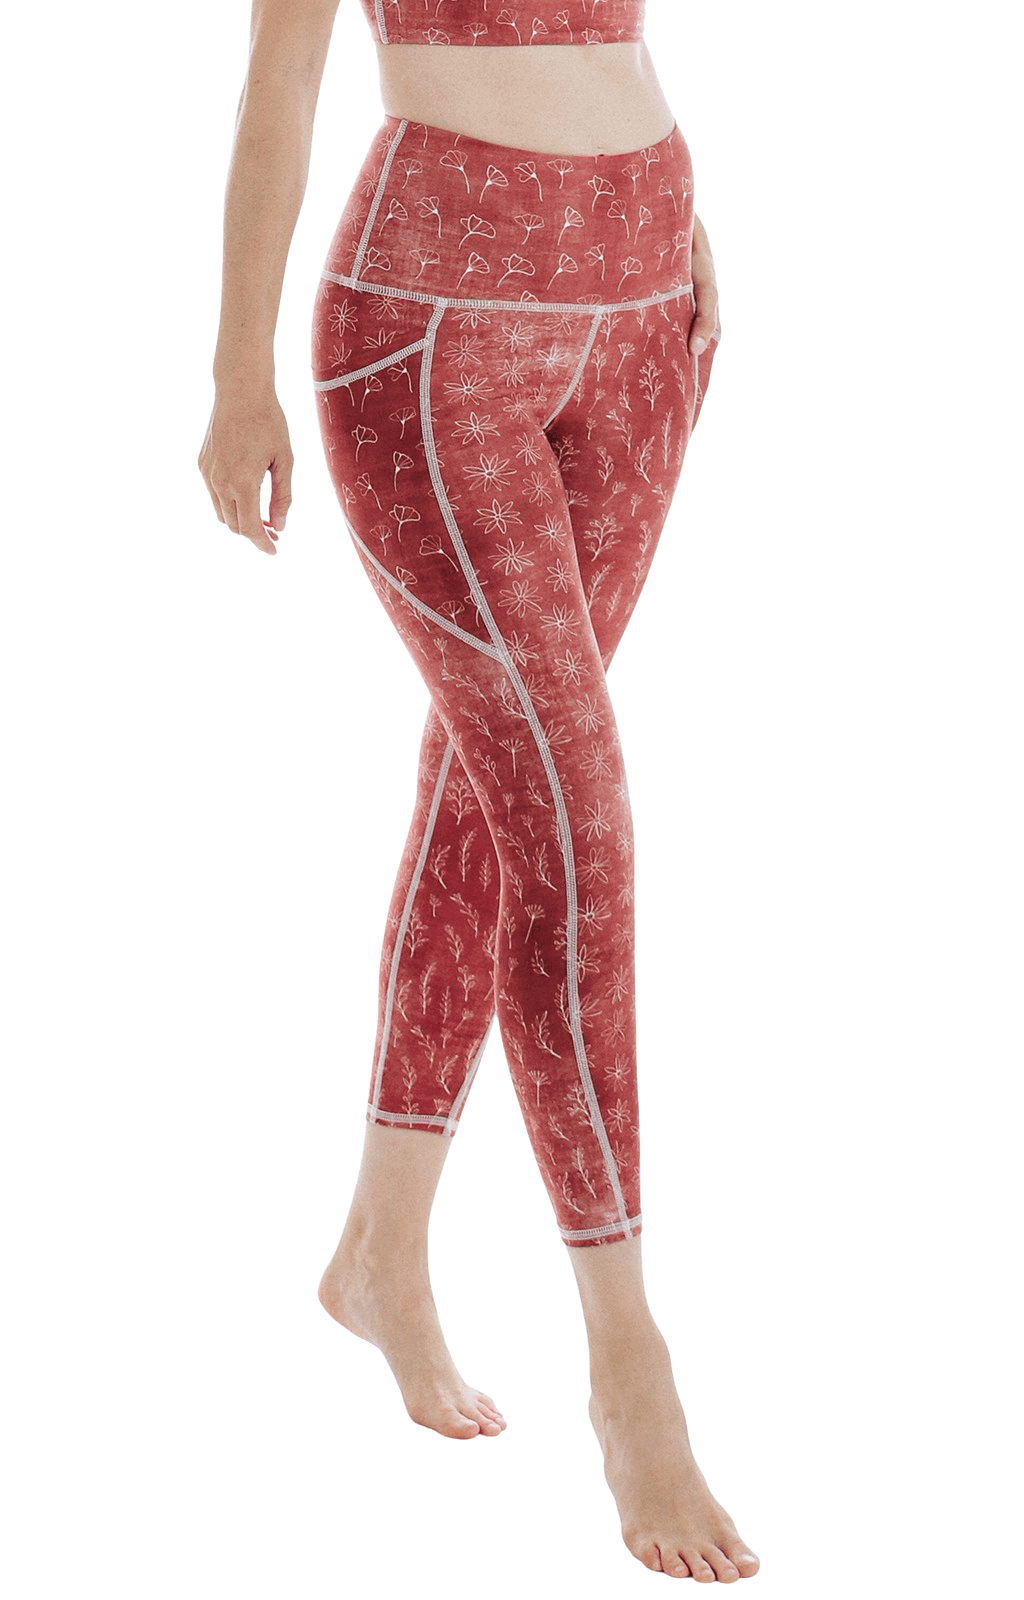 7/8 Boundless Legging with Pockets in Terracotta Time by Yoga Democracy